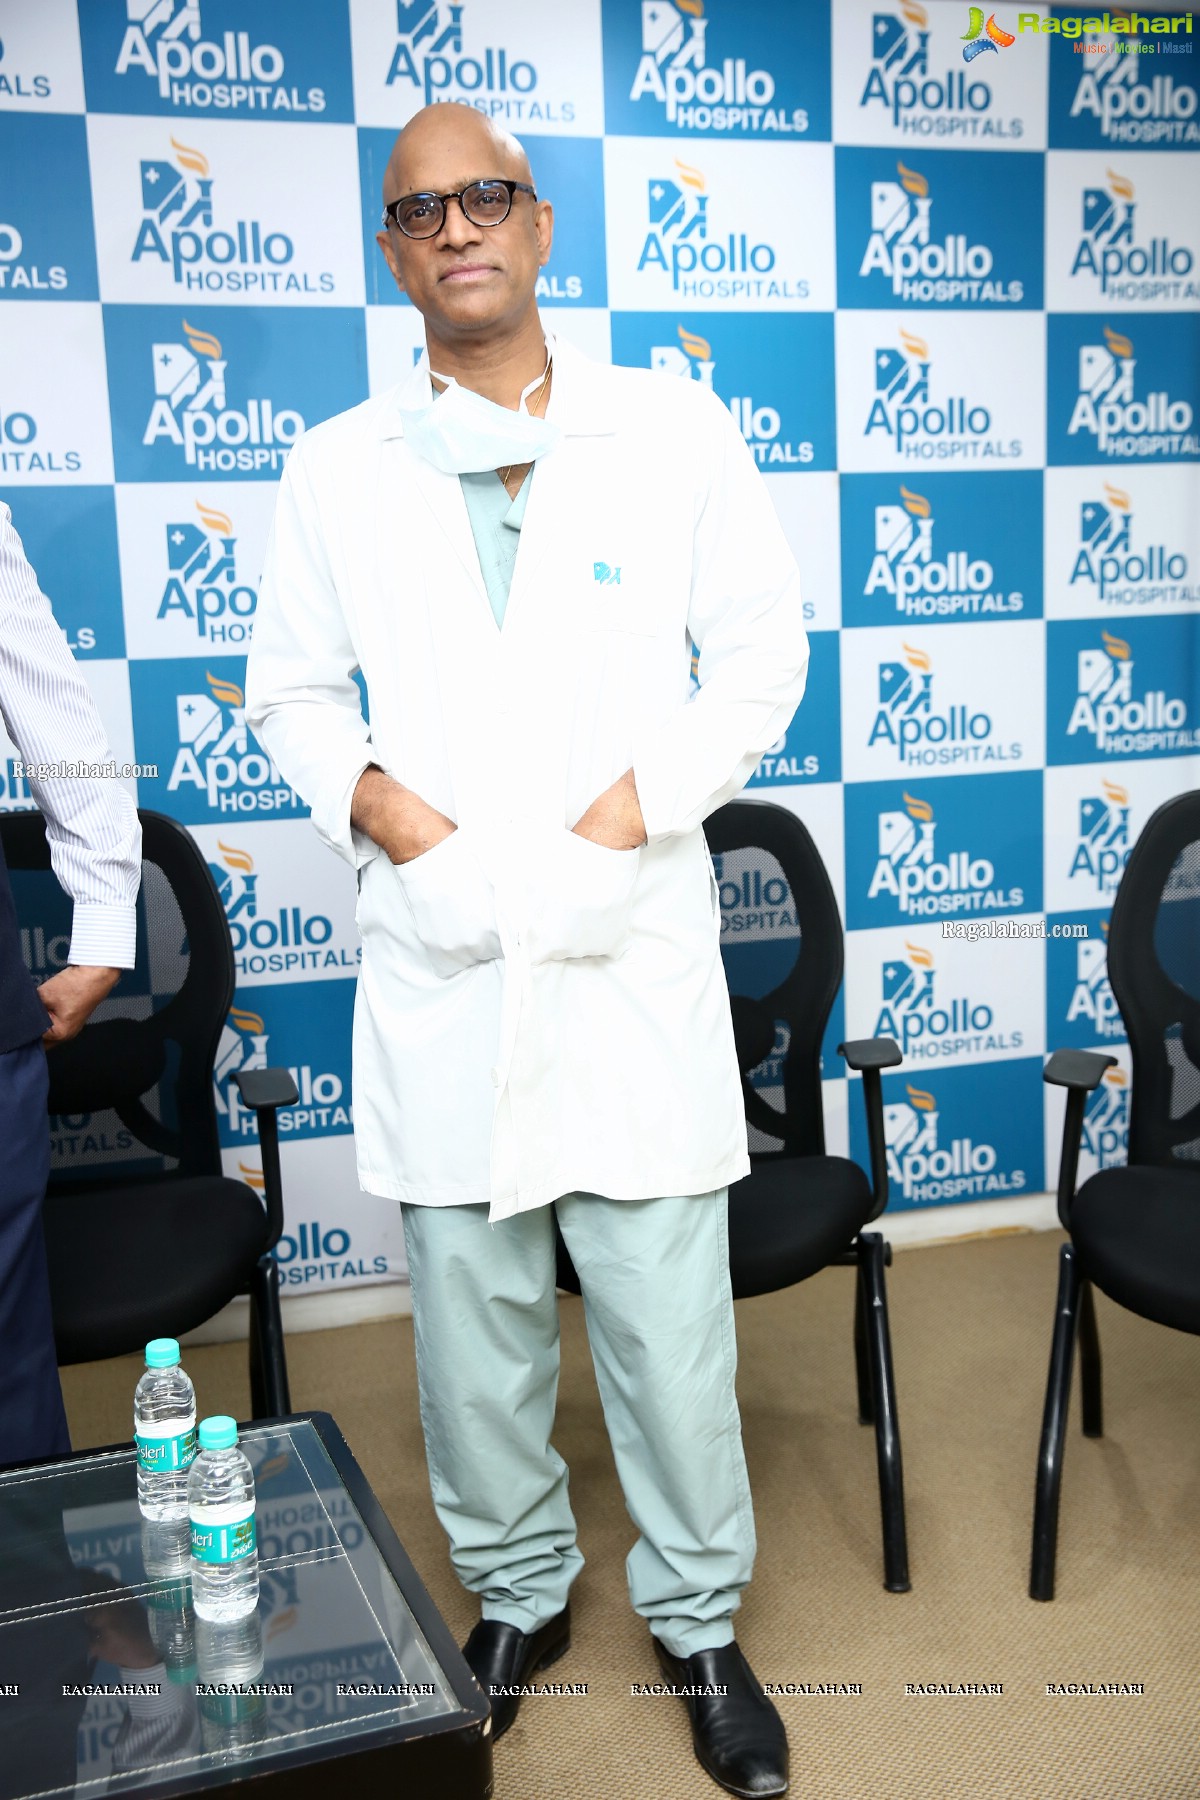 Apollo Hospitals: The Patient with Cadaver Heart Brought by Metro Rail, Recovers!